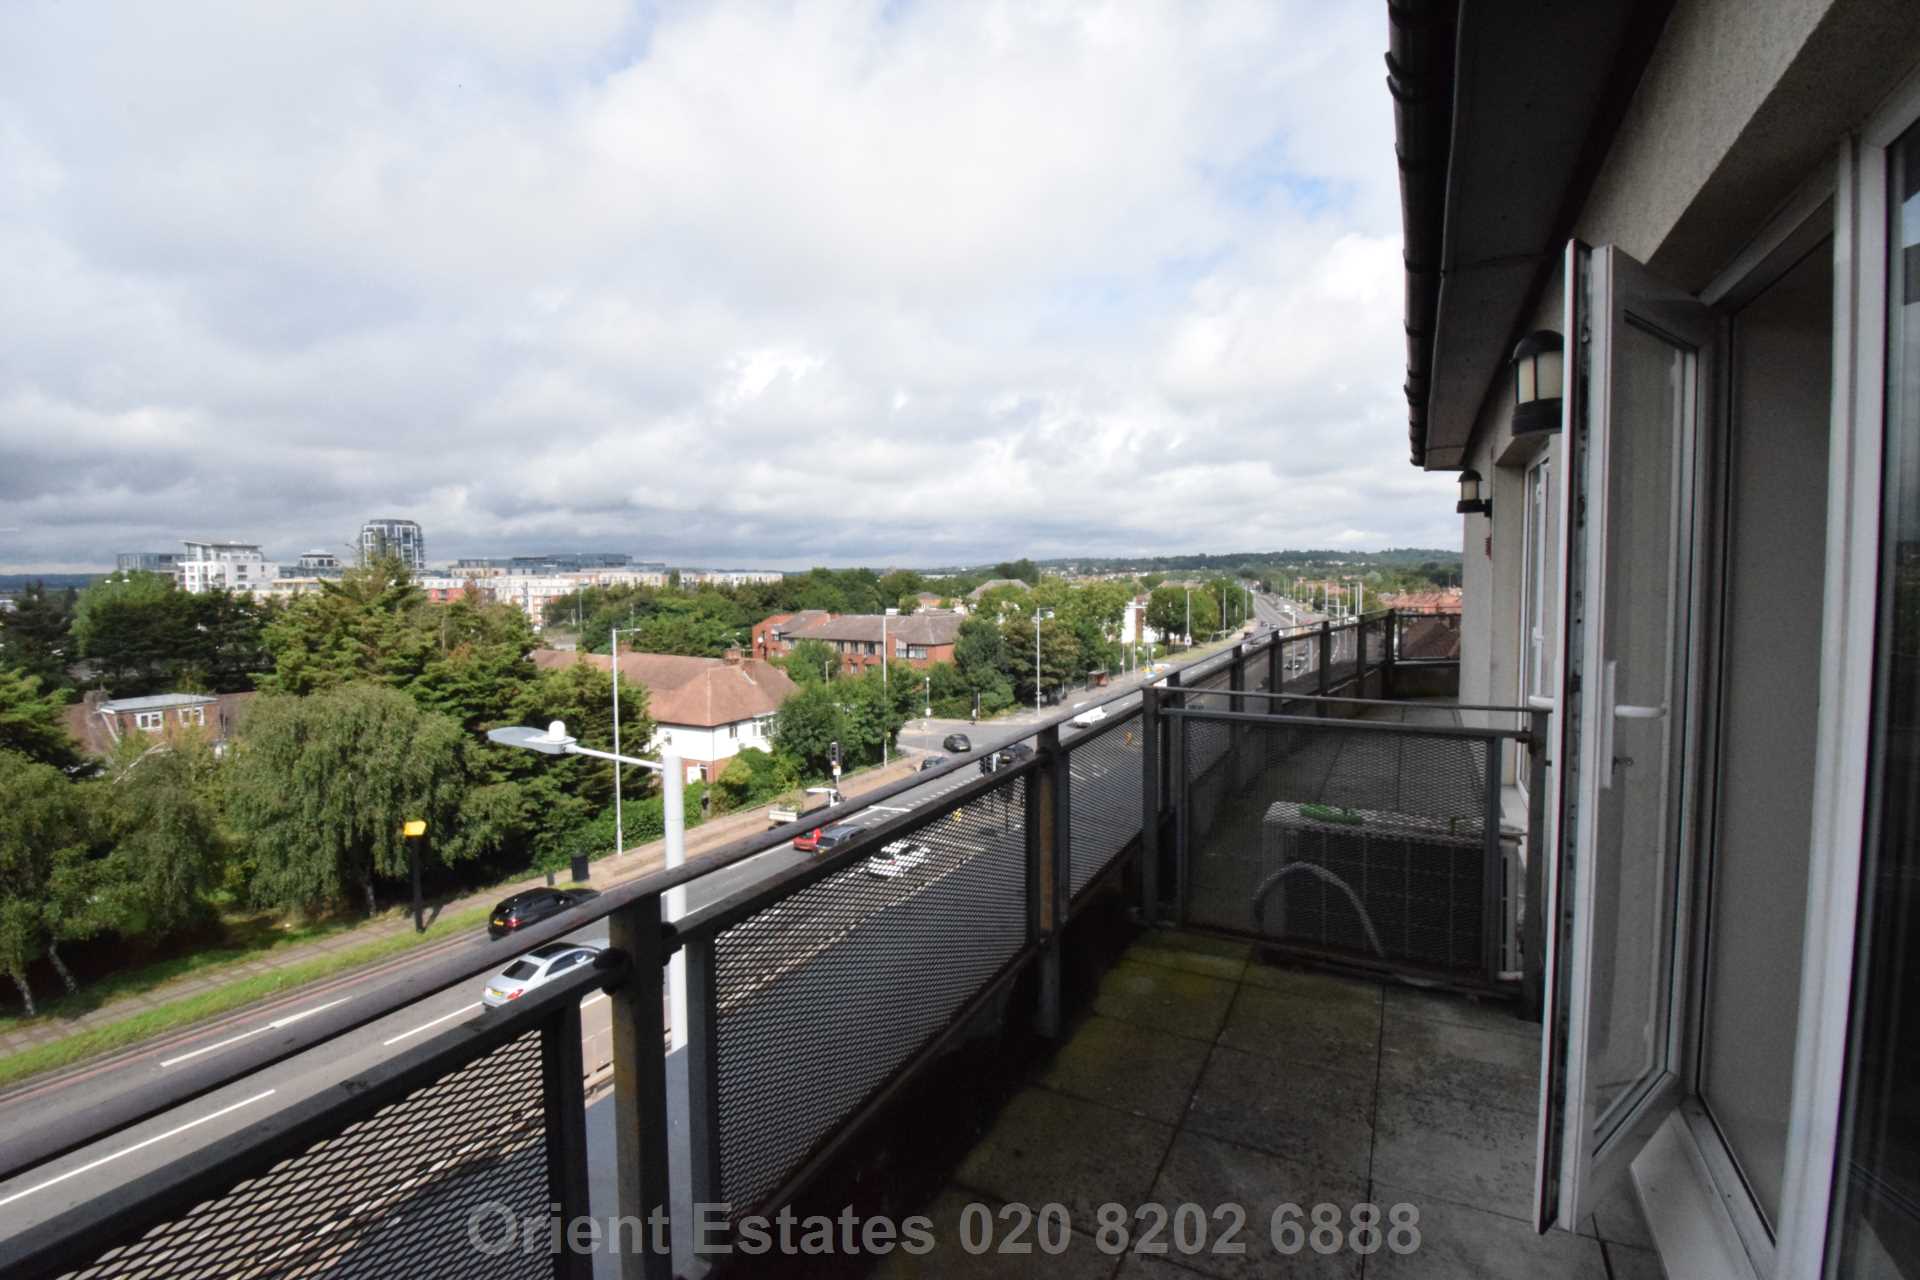 Peaberry Court, Hendon, NW4, Image 8